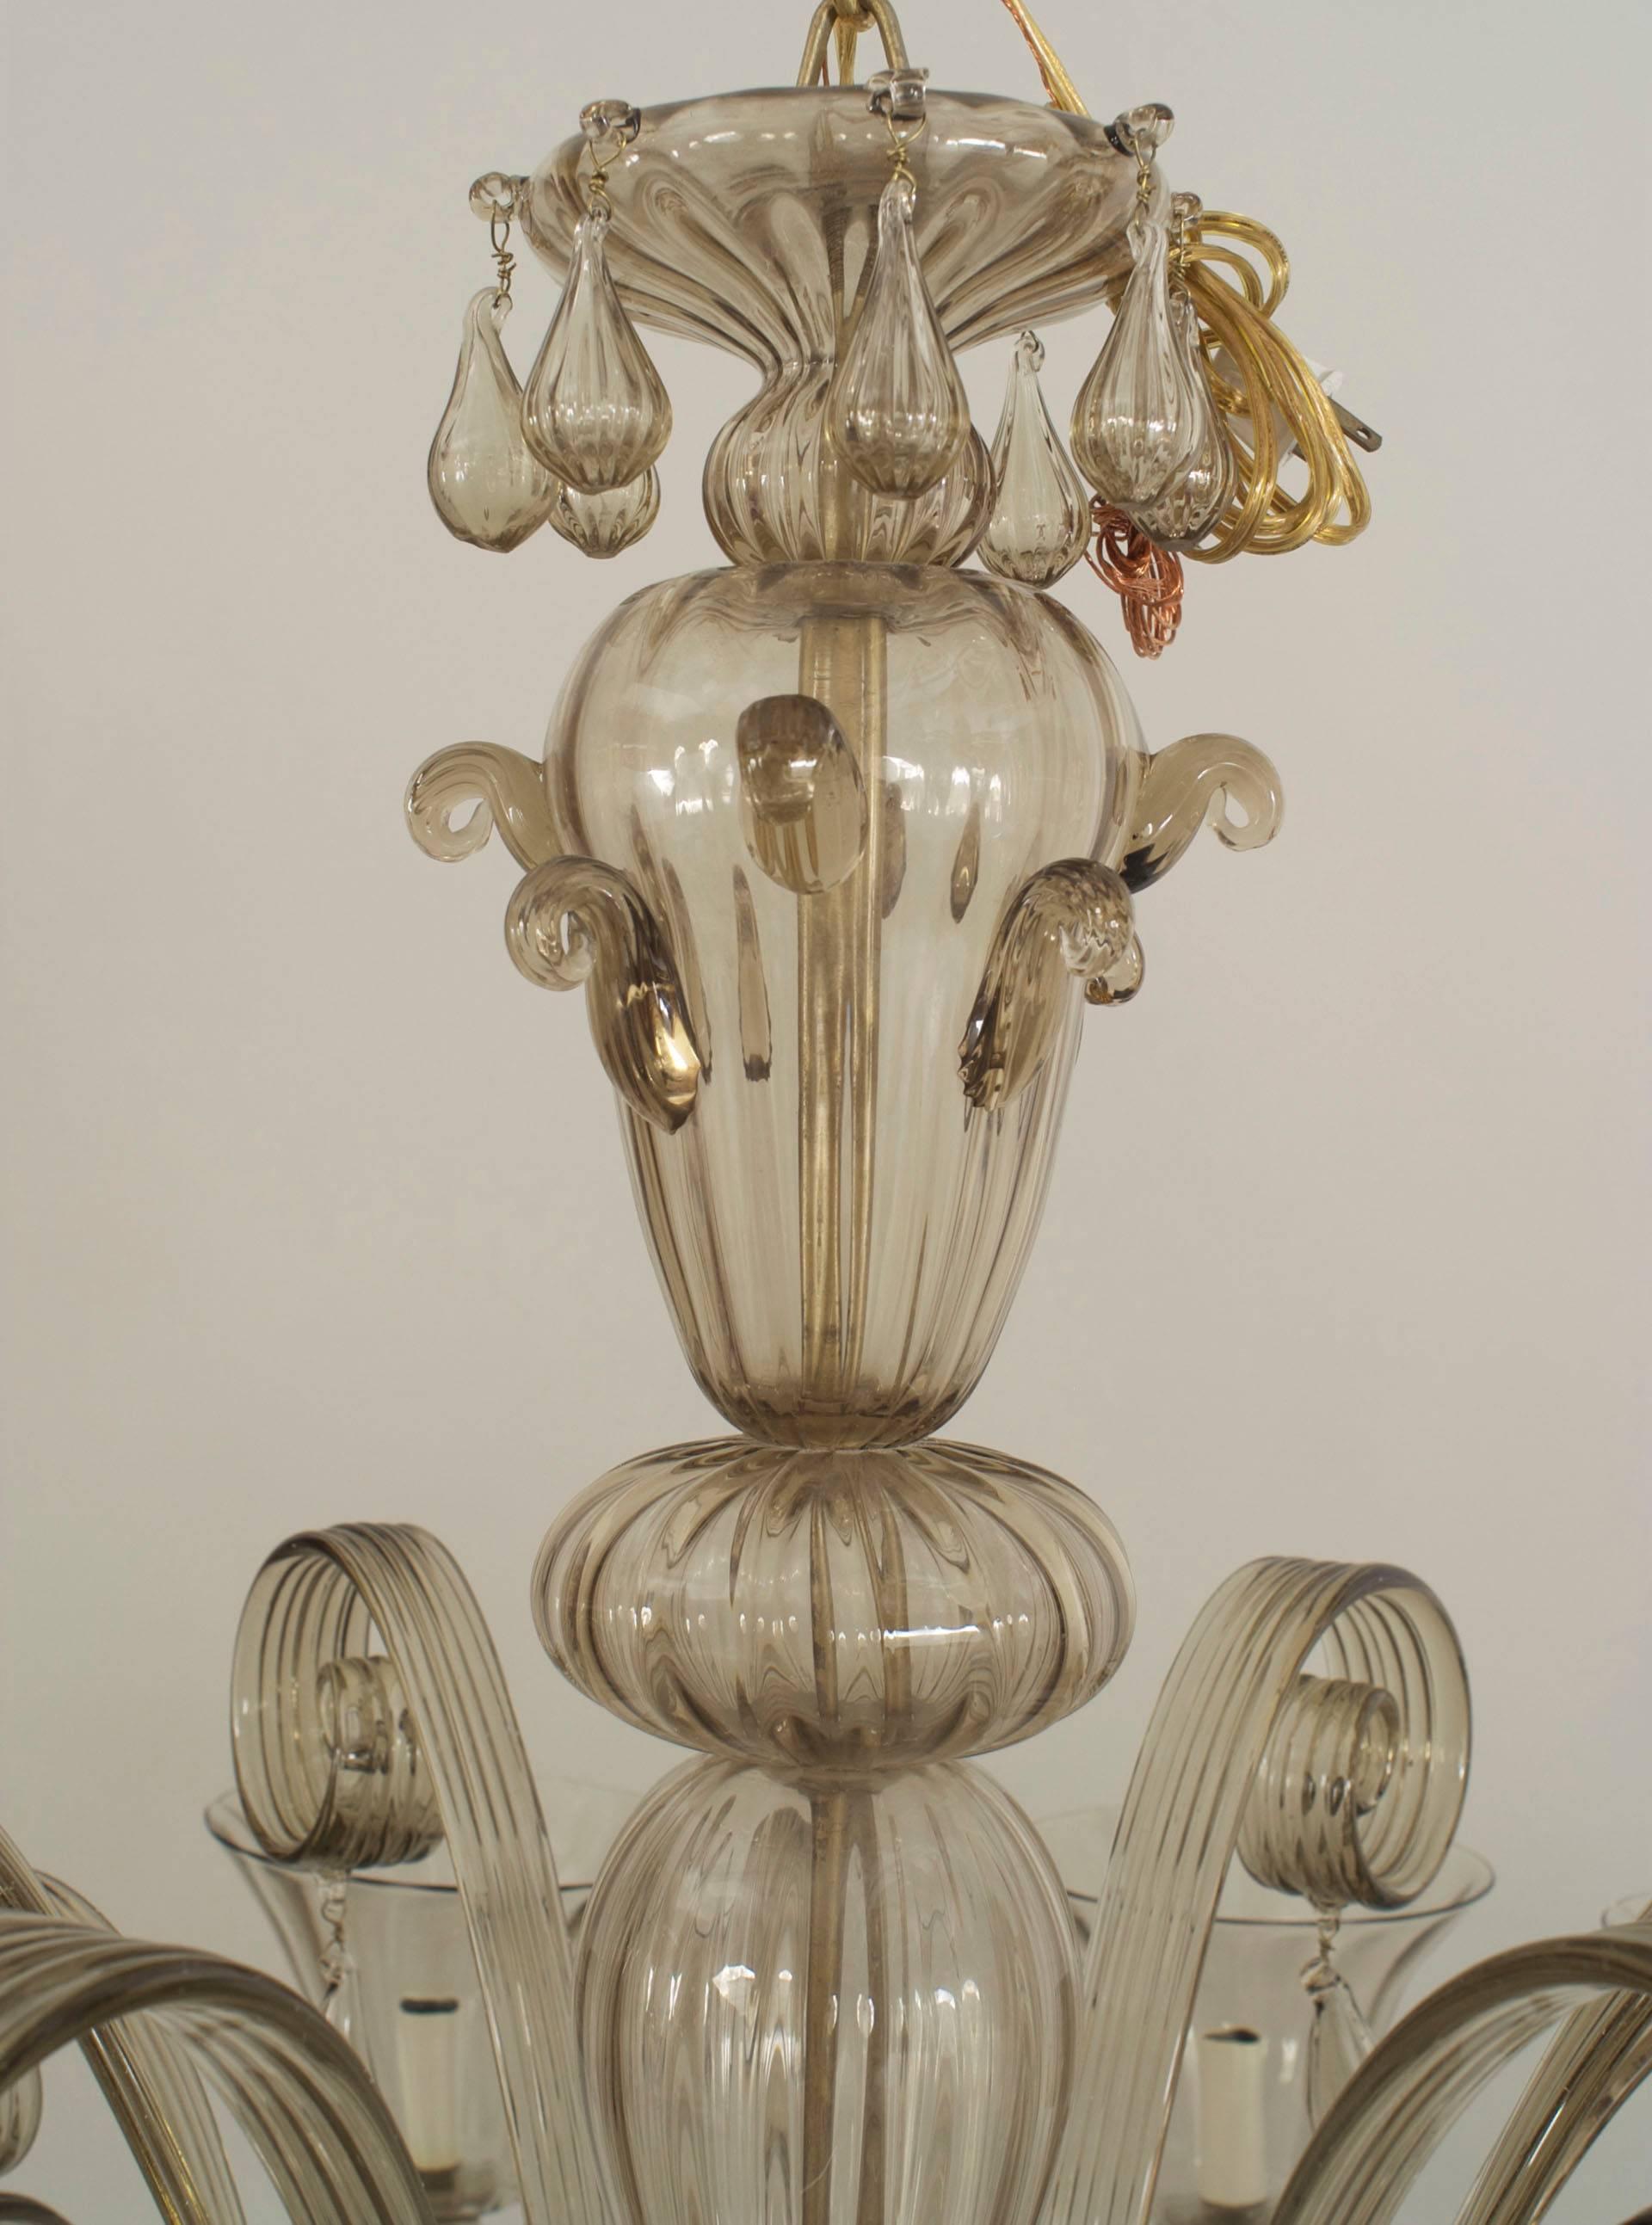 Italian Venetian Murano 12 fluted arm smoky glass chandelier with 12 up and 6 down scrolls with drops between the arms and emanating from a tiered base with a ball finial bottom.
